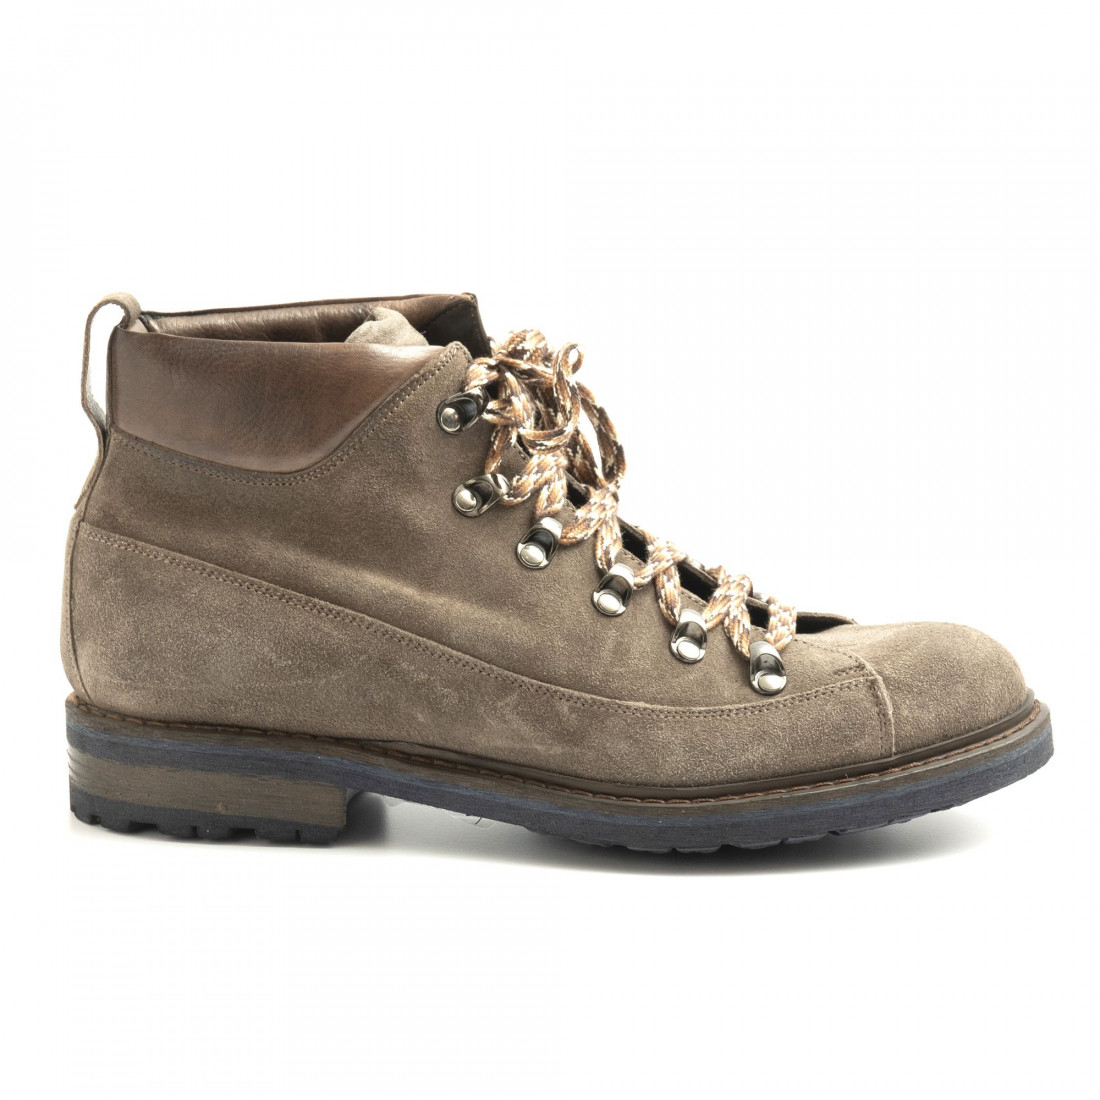 Brecos mid cut lace up shoes in taupe suede